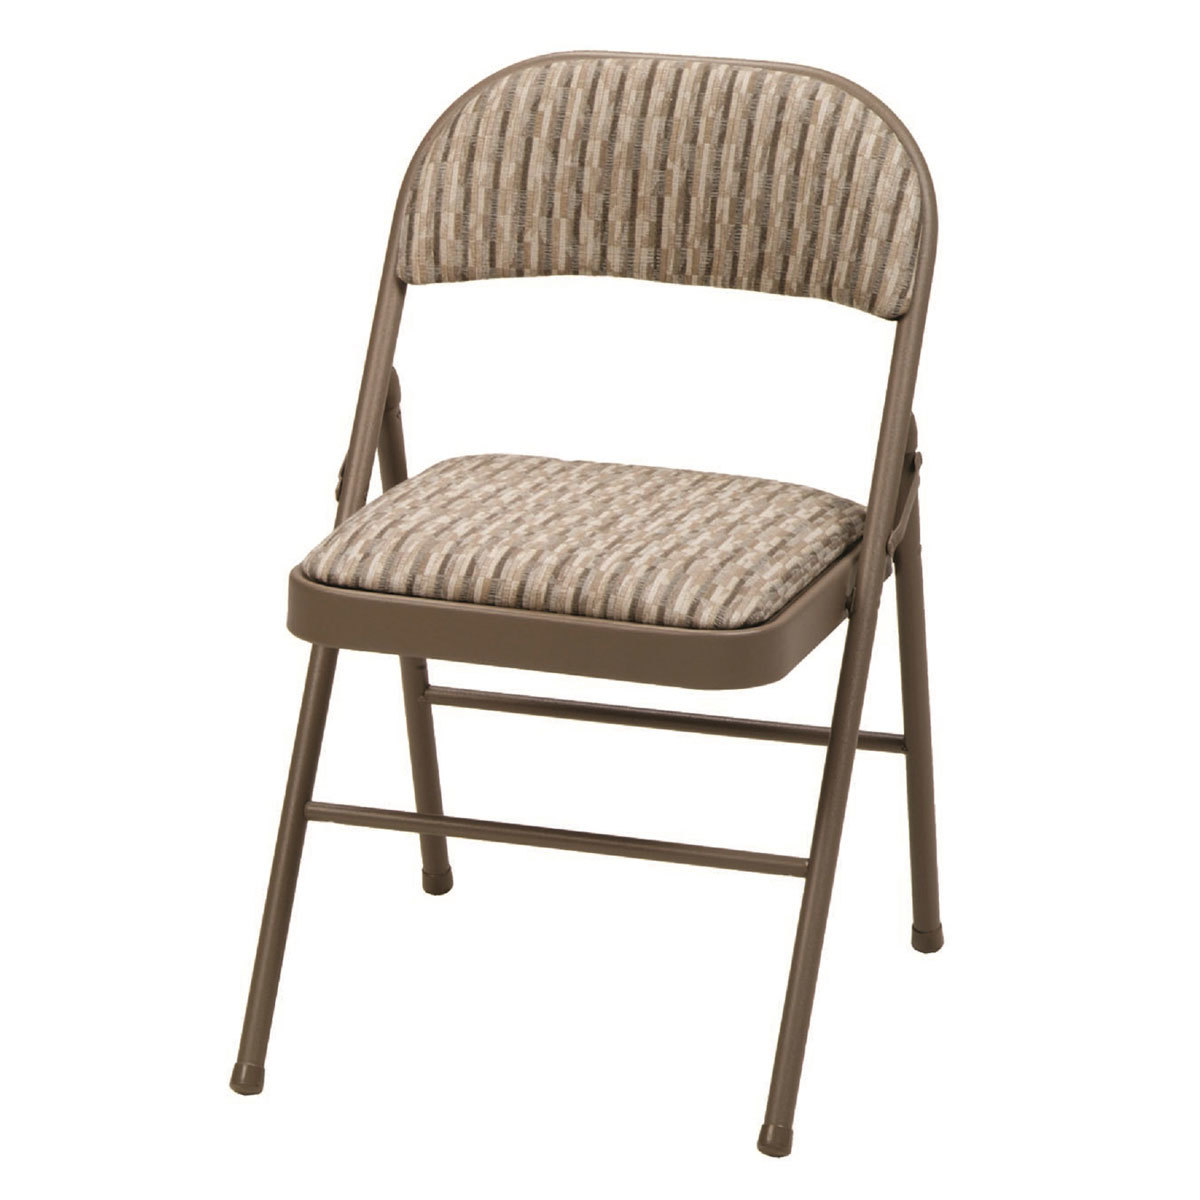 Padded Folding Chairs With Arms / Cosco Deluxe Fabric Padded Folding